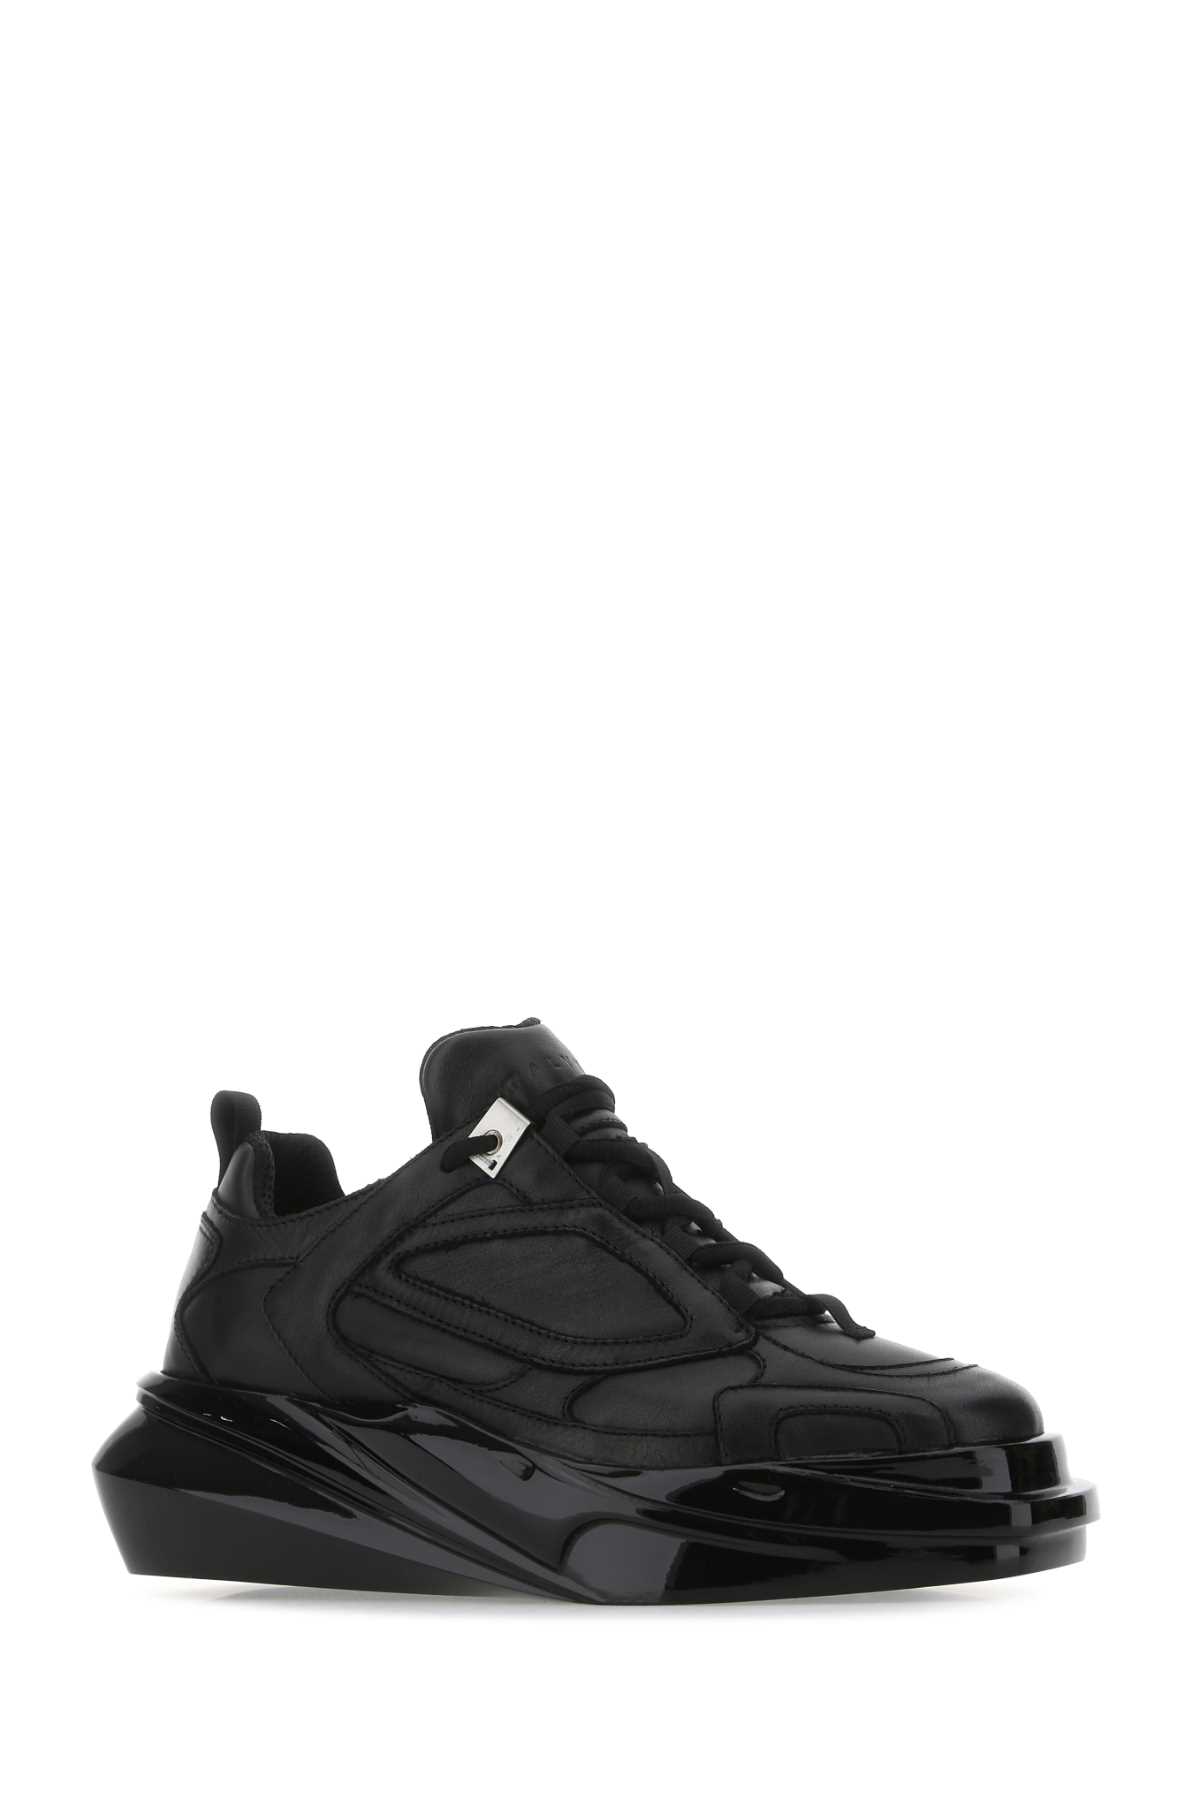 Alyx Black Leather Hiking Trainers In Blk0001